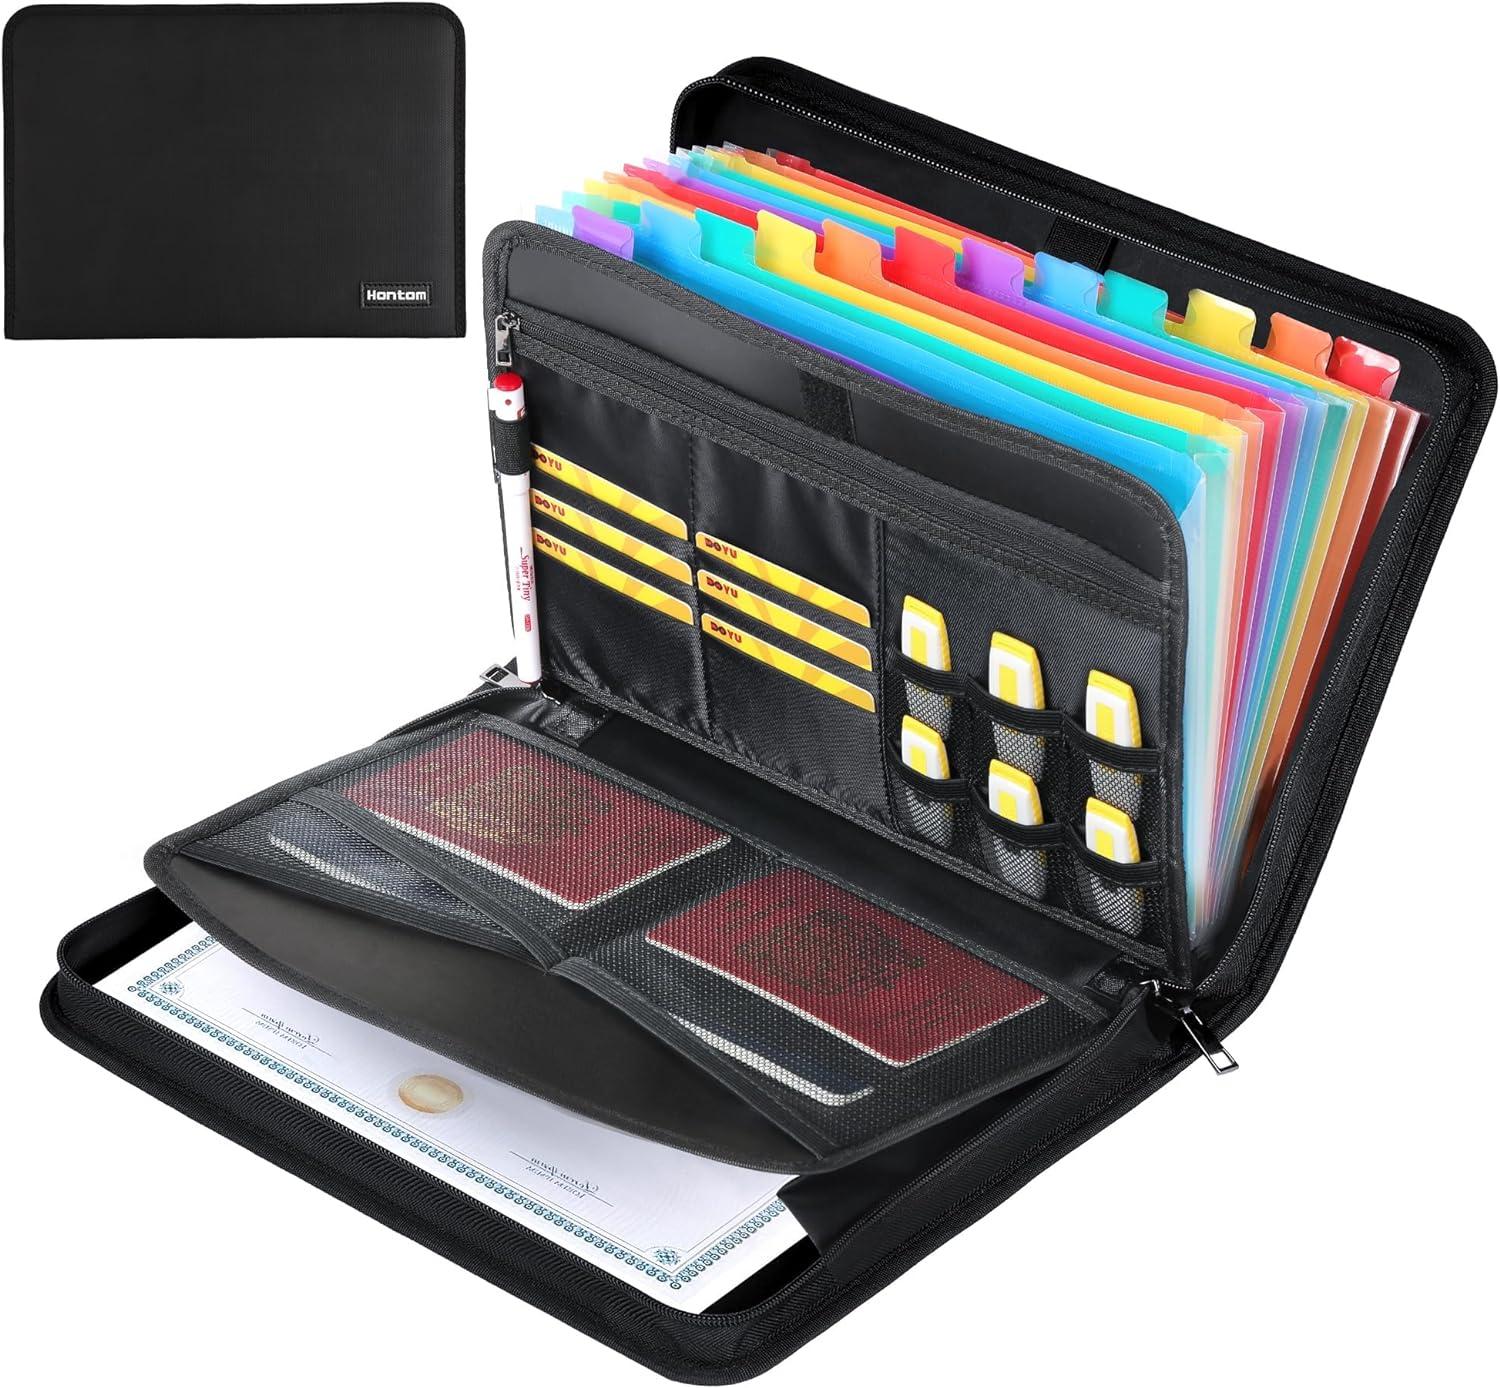 hontom expanding file folder 13 pockets fireproof accordion file organizer with multicolored pockets travel